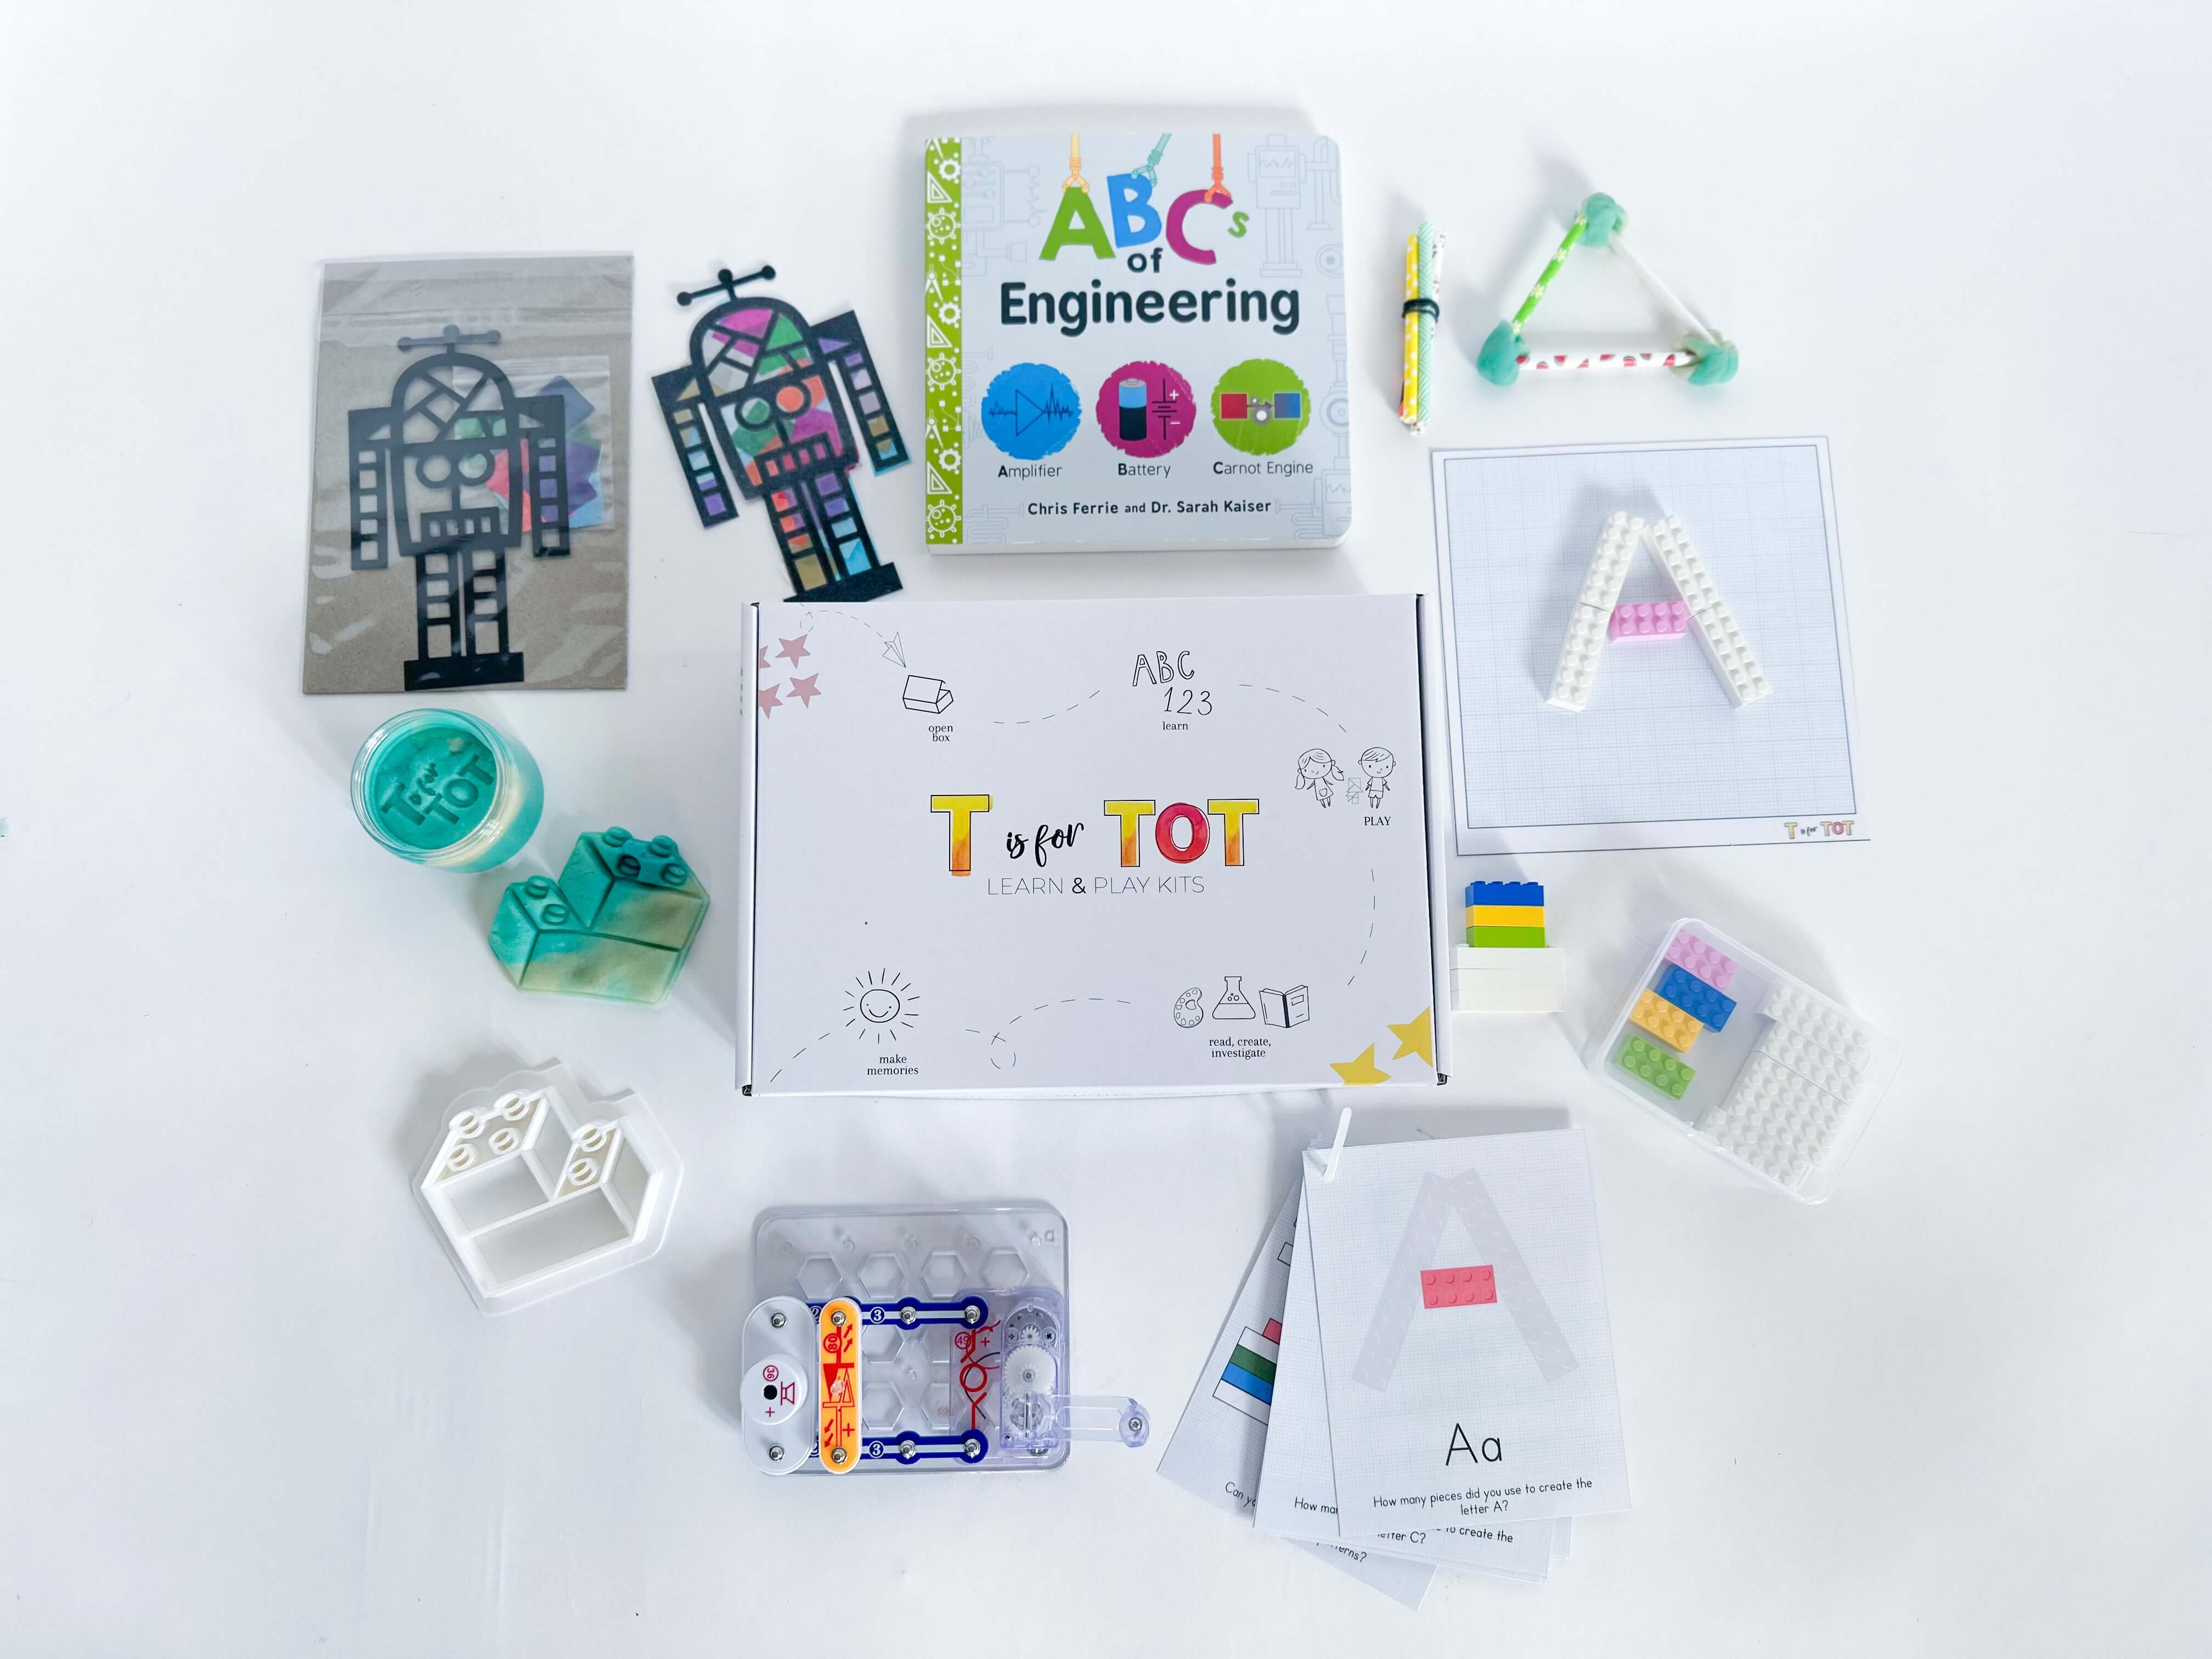 Engineering-focused play and learn kit for kids. Comes with a snap circuit for ages 3-6, Lego playdough cutter, homemade playdough, Robot Suncatcher, straw STEM activity, and educational Lego cards in a plastic case. Great for early STEM exploration.